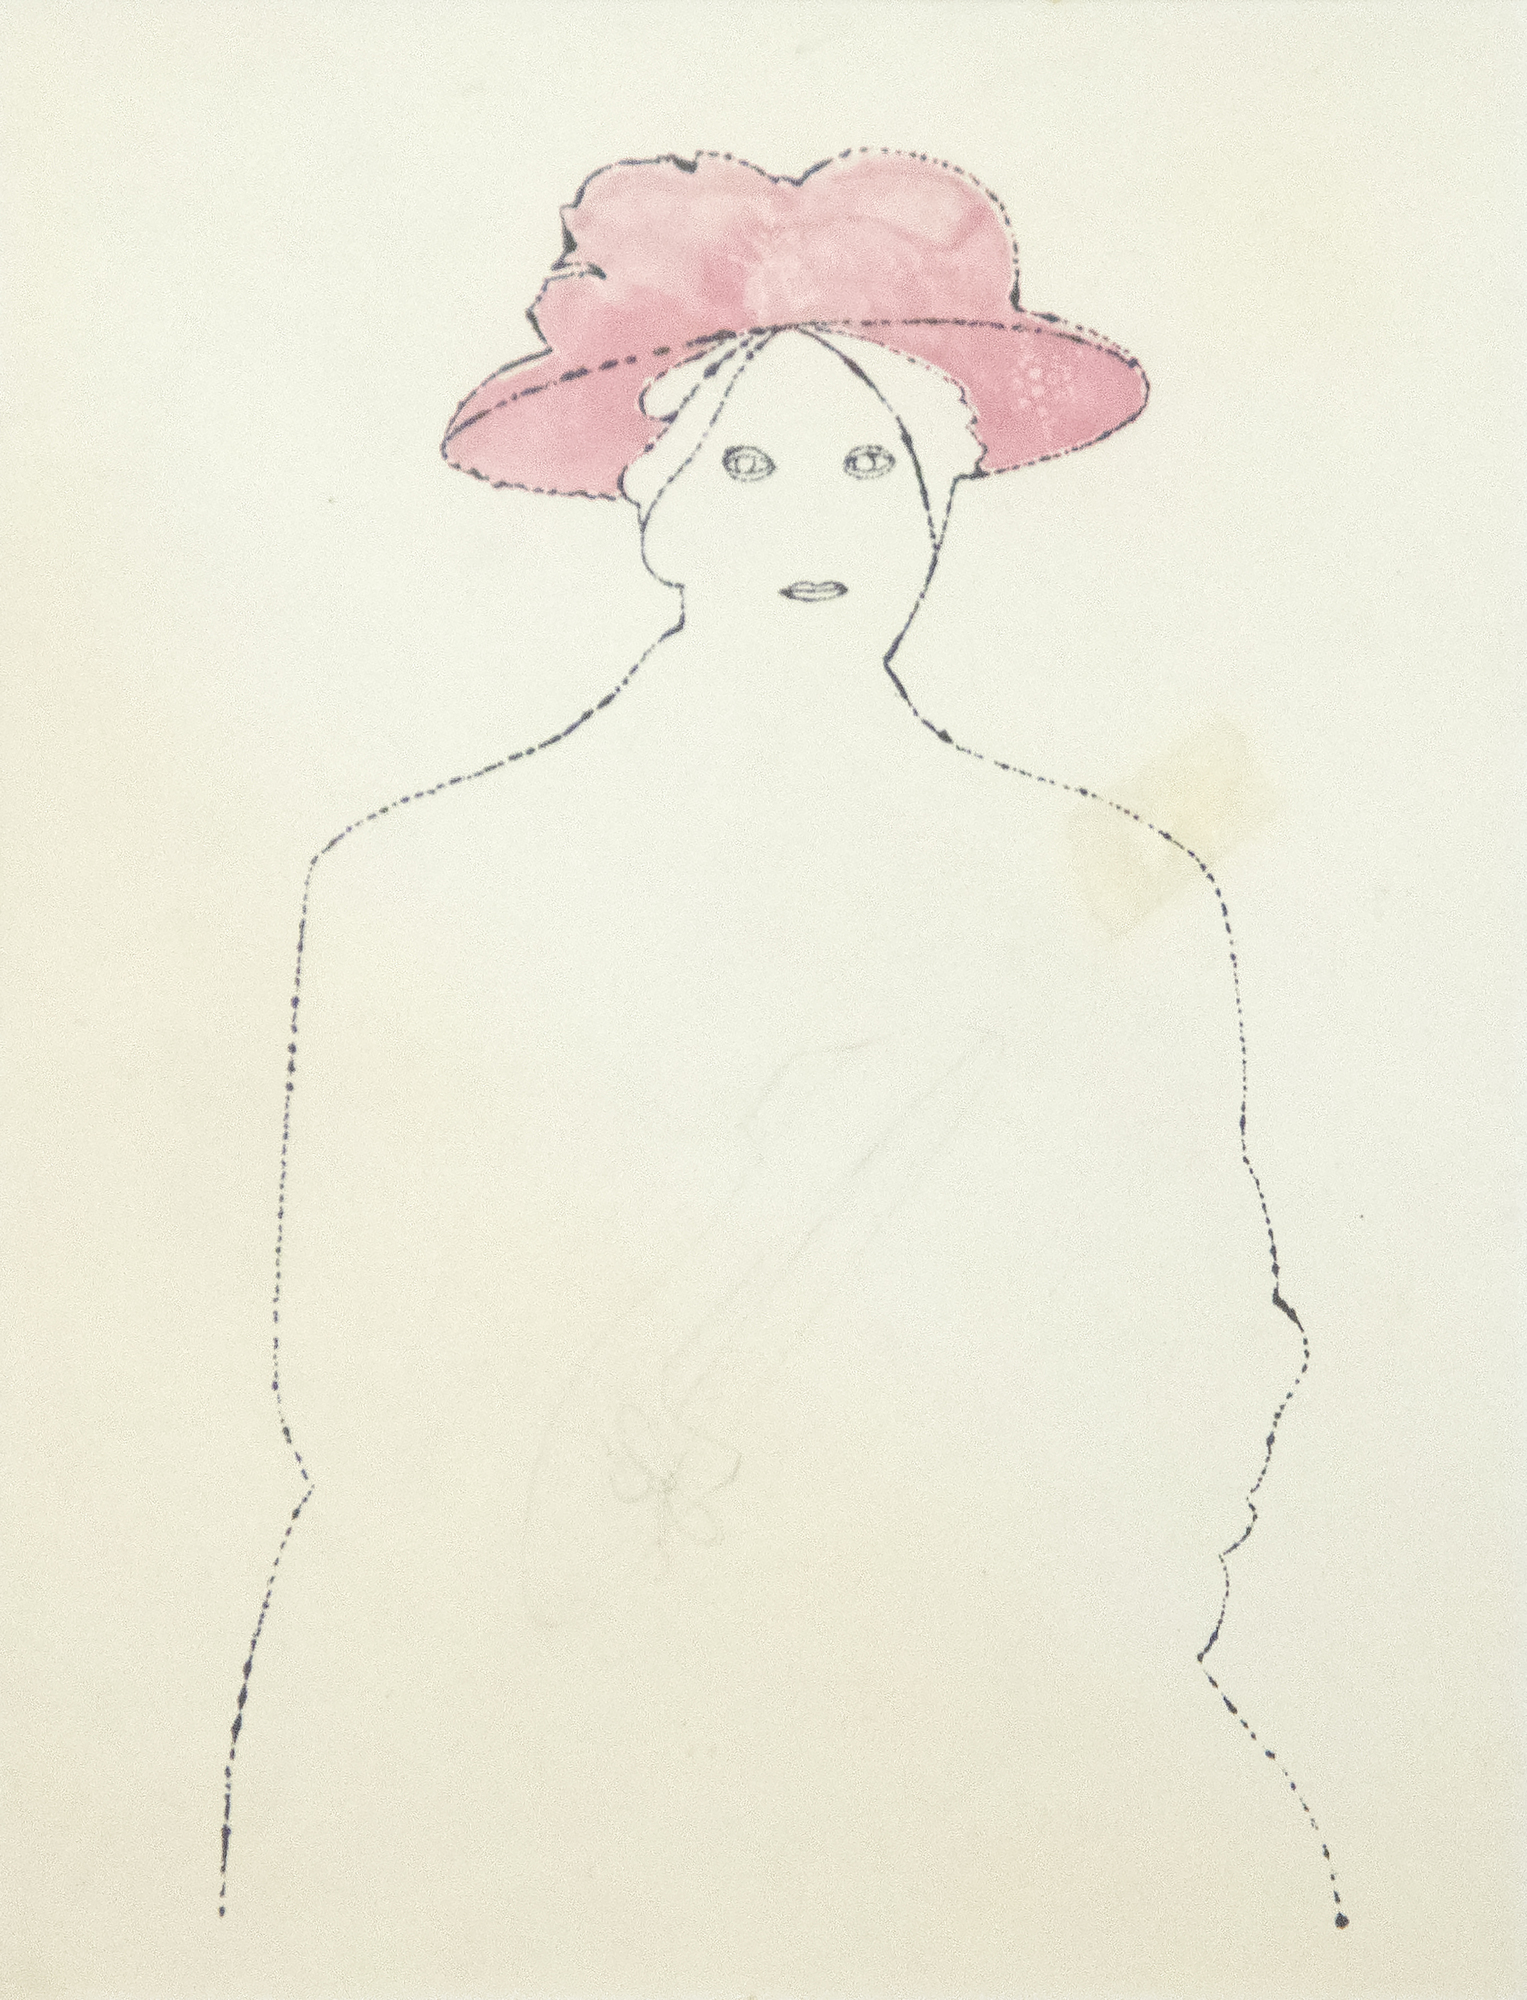 ANDY WARHOL - Woman in a Pink Hat - ink and tempera on paper - 10 5/8 x 8 in.